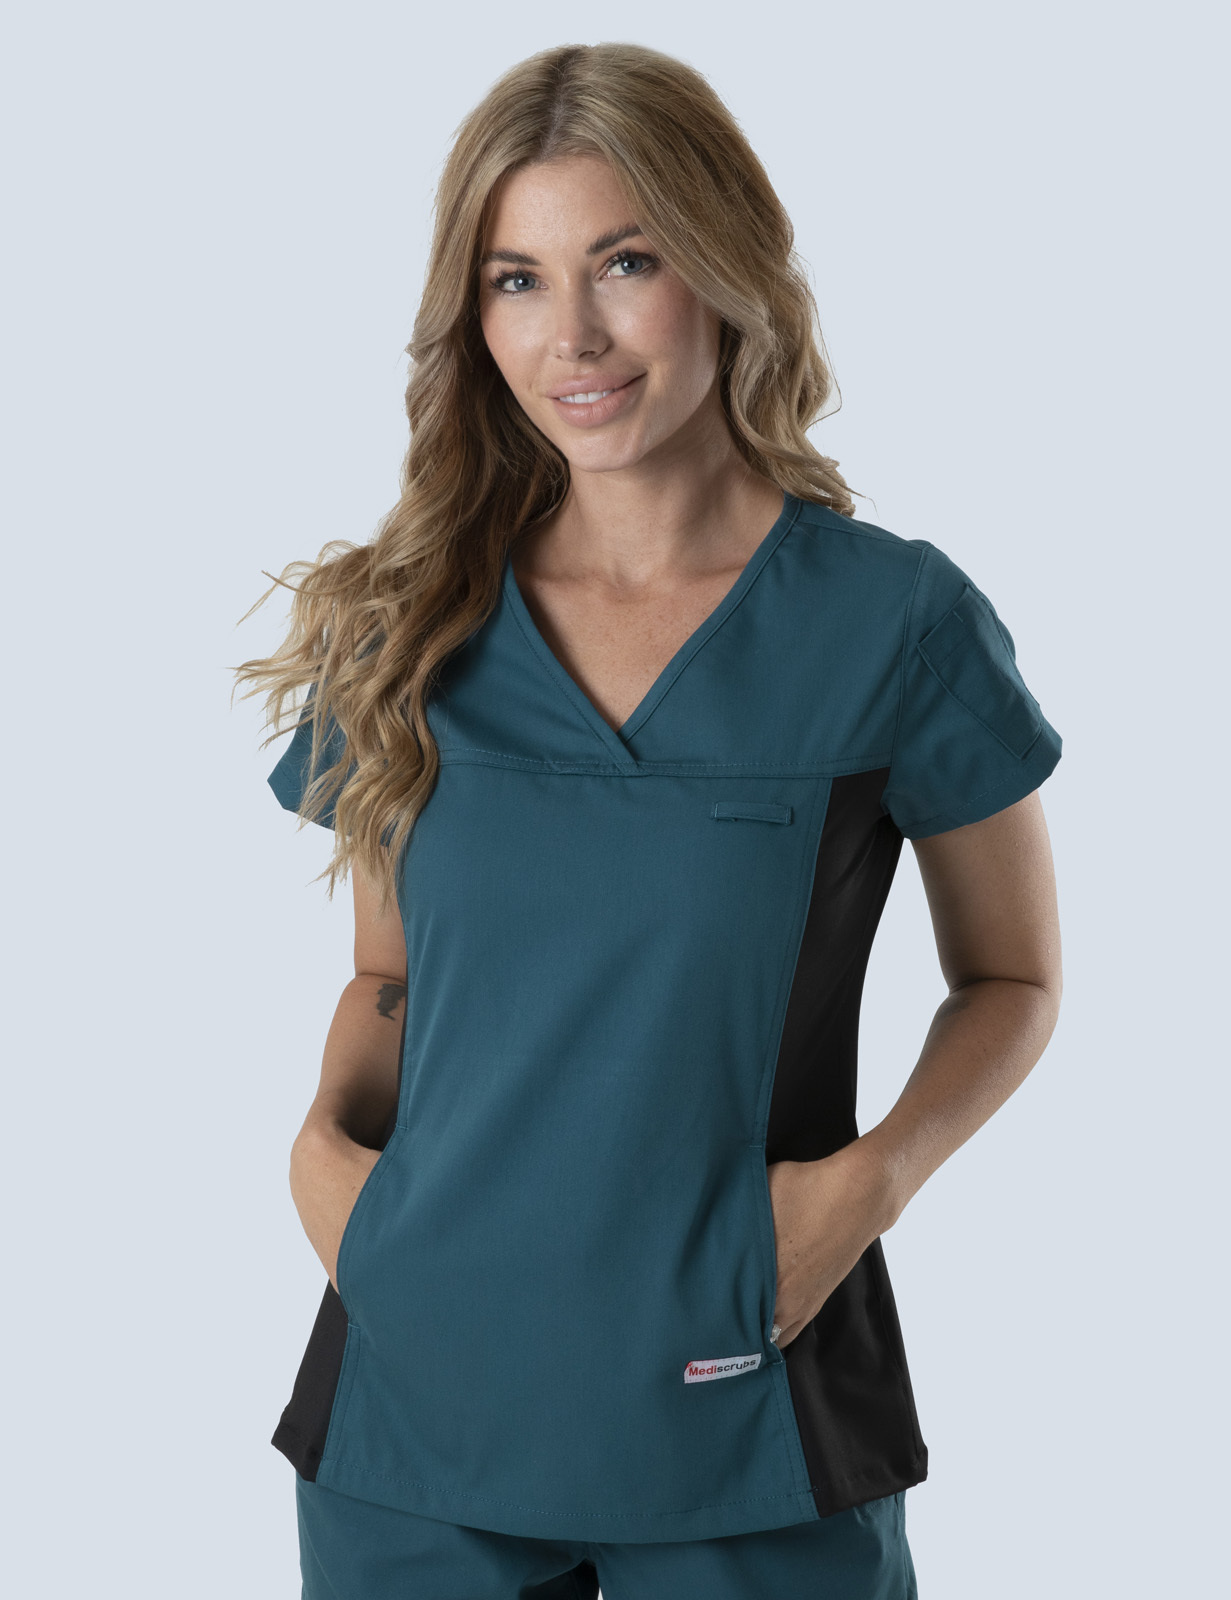 Women's Fit Solid Scrub Top With Spandex Panel - Caribbean - X Large